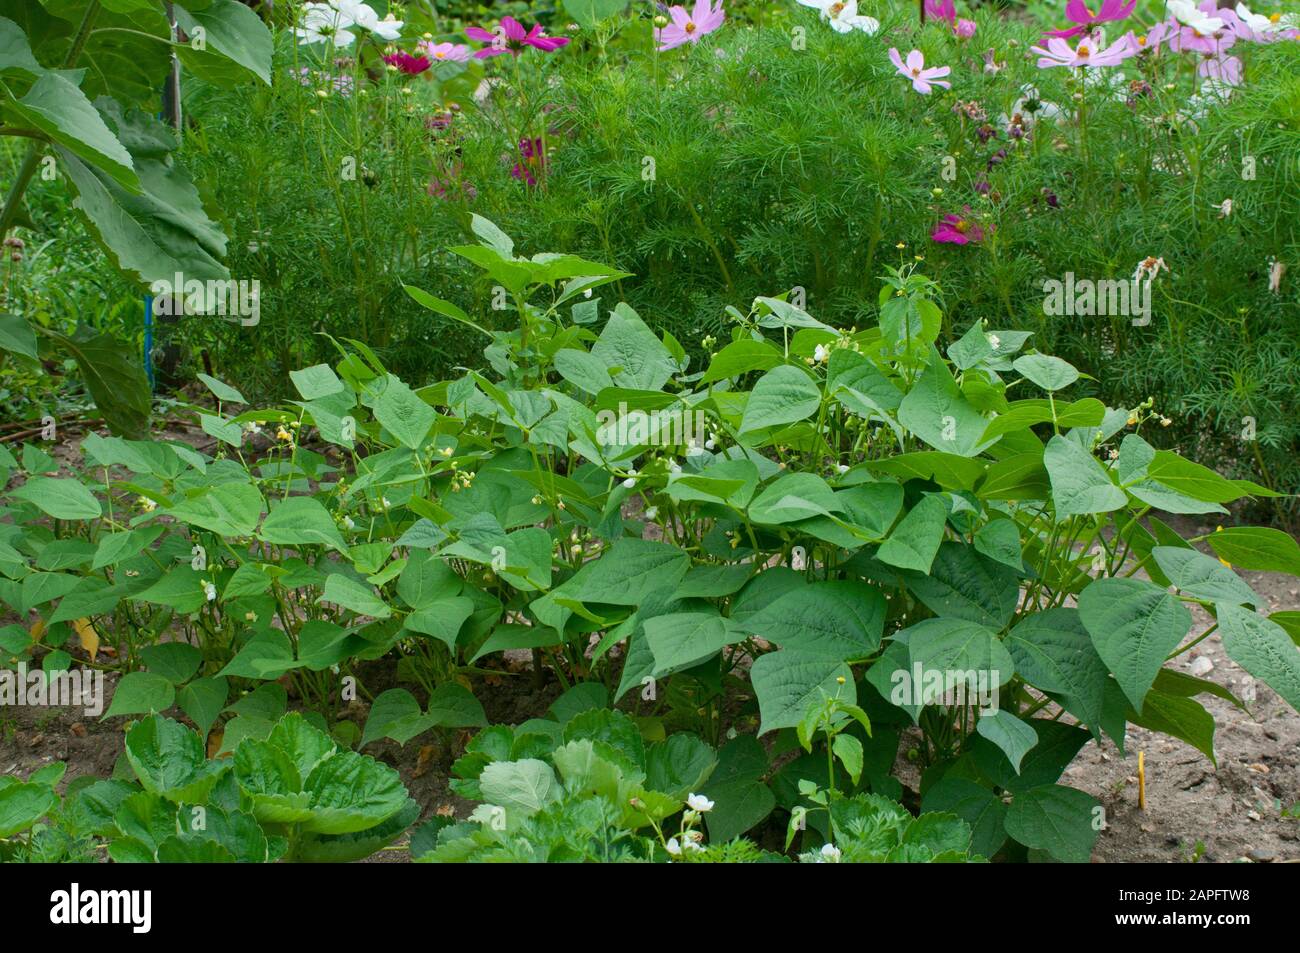 Flower garden: Green beans (Phaseolus vulgaris) and Cosmos (Cosmos sp) in bloom Stock Photo